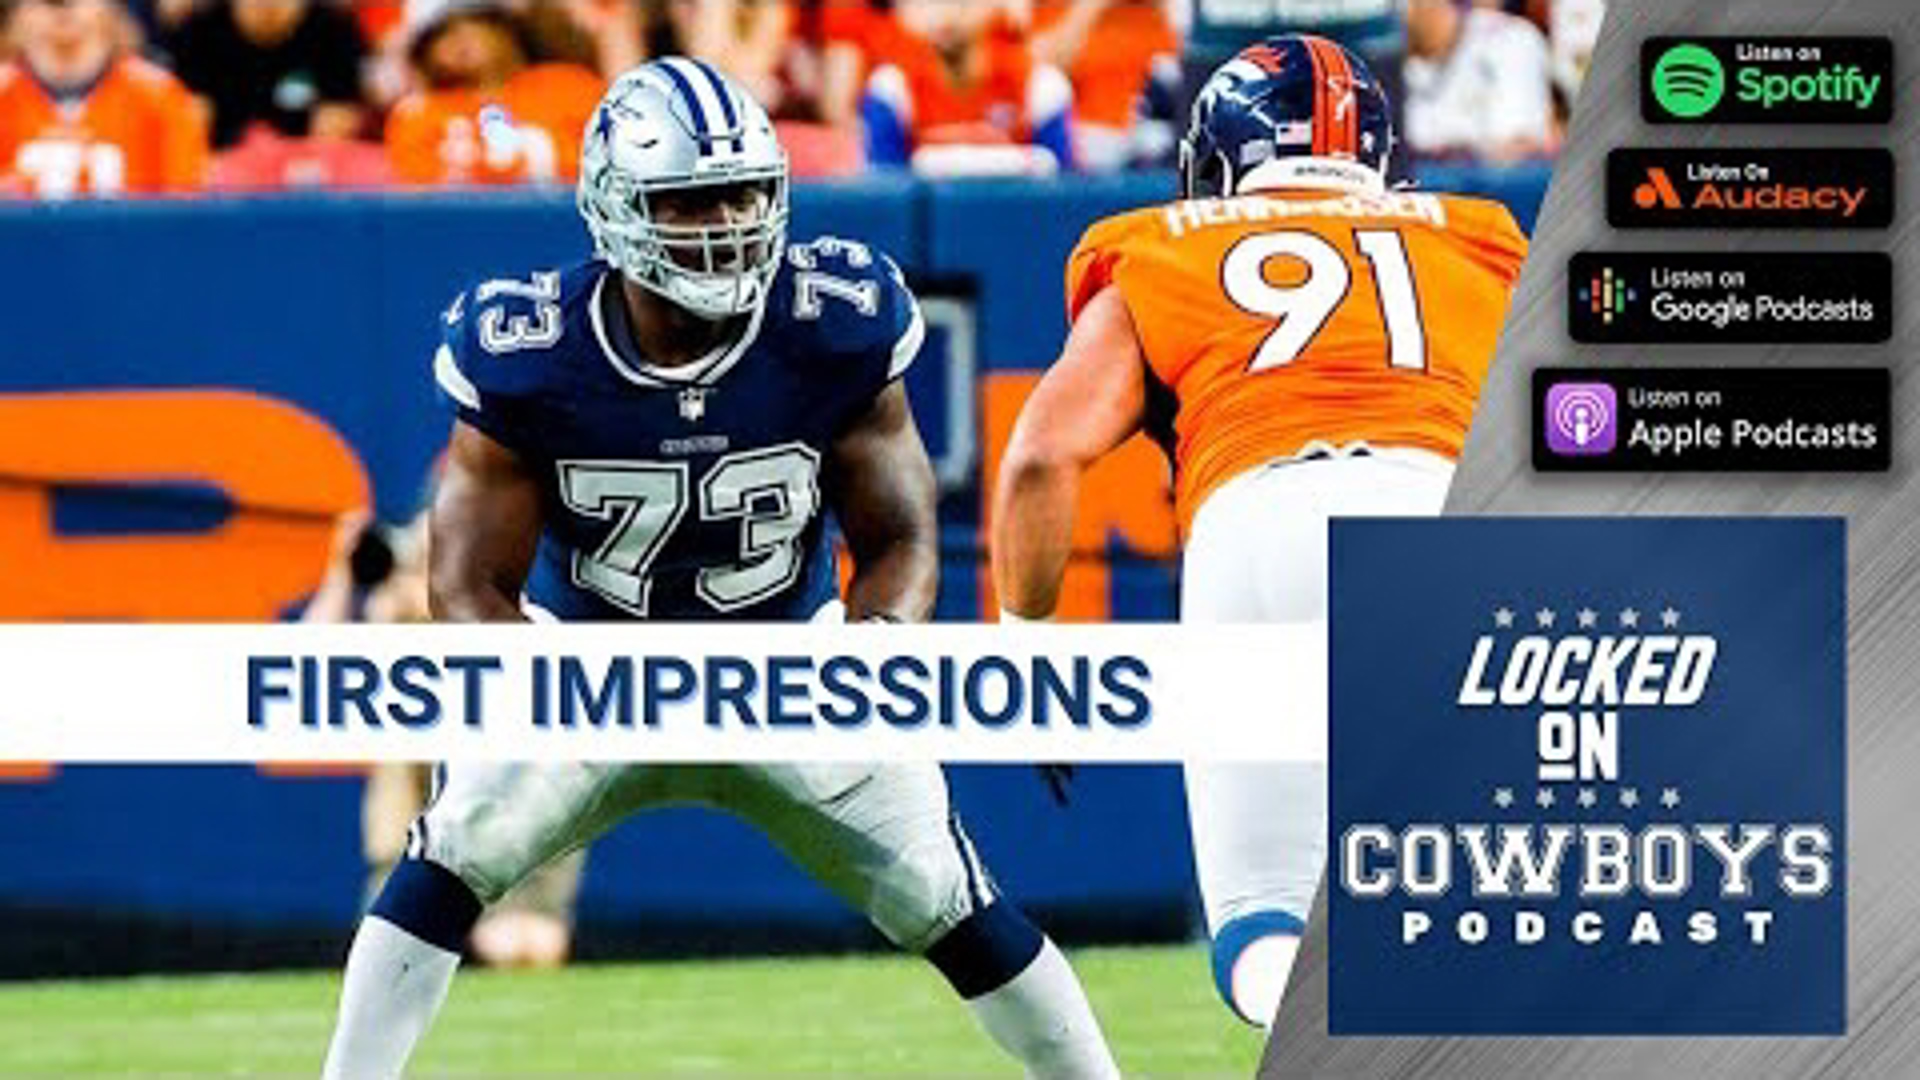 Marcus Mosher and Landon McCool of Locked On Cowboys give their first impressions of the rookie class for the Dallas Cowboys in their first preseason game.